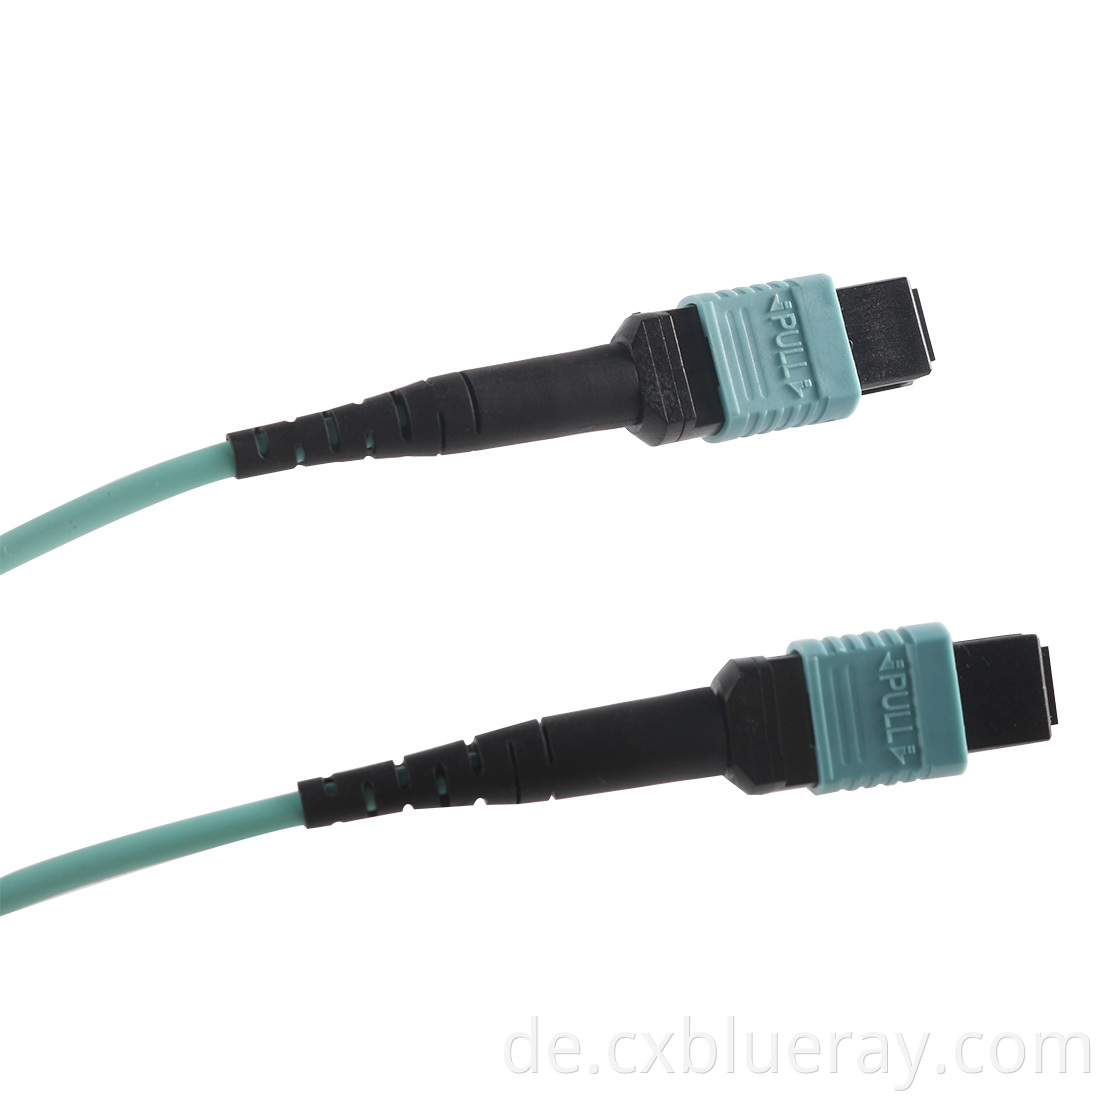 Om3 Mtp/ Mpo Cable